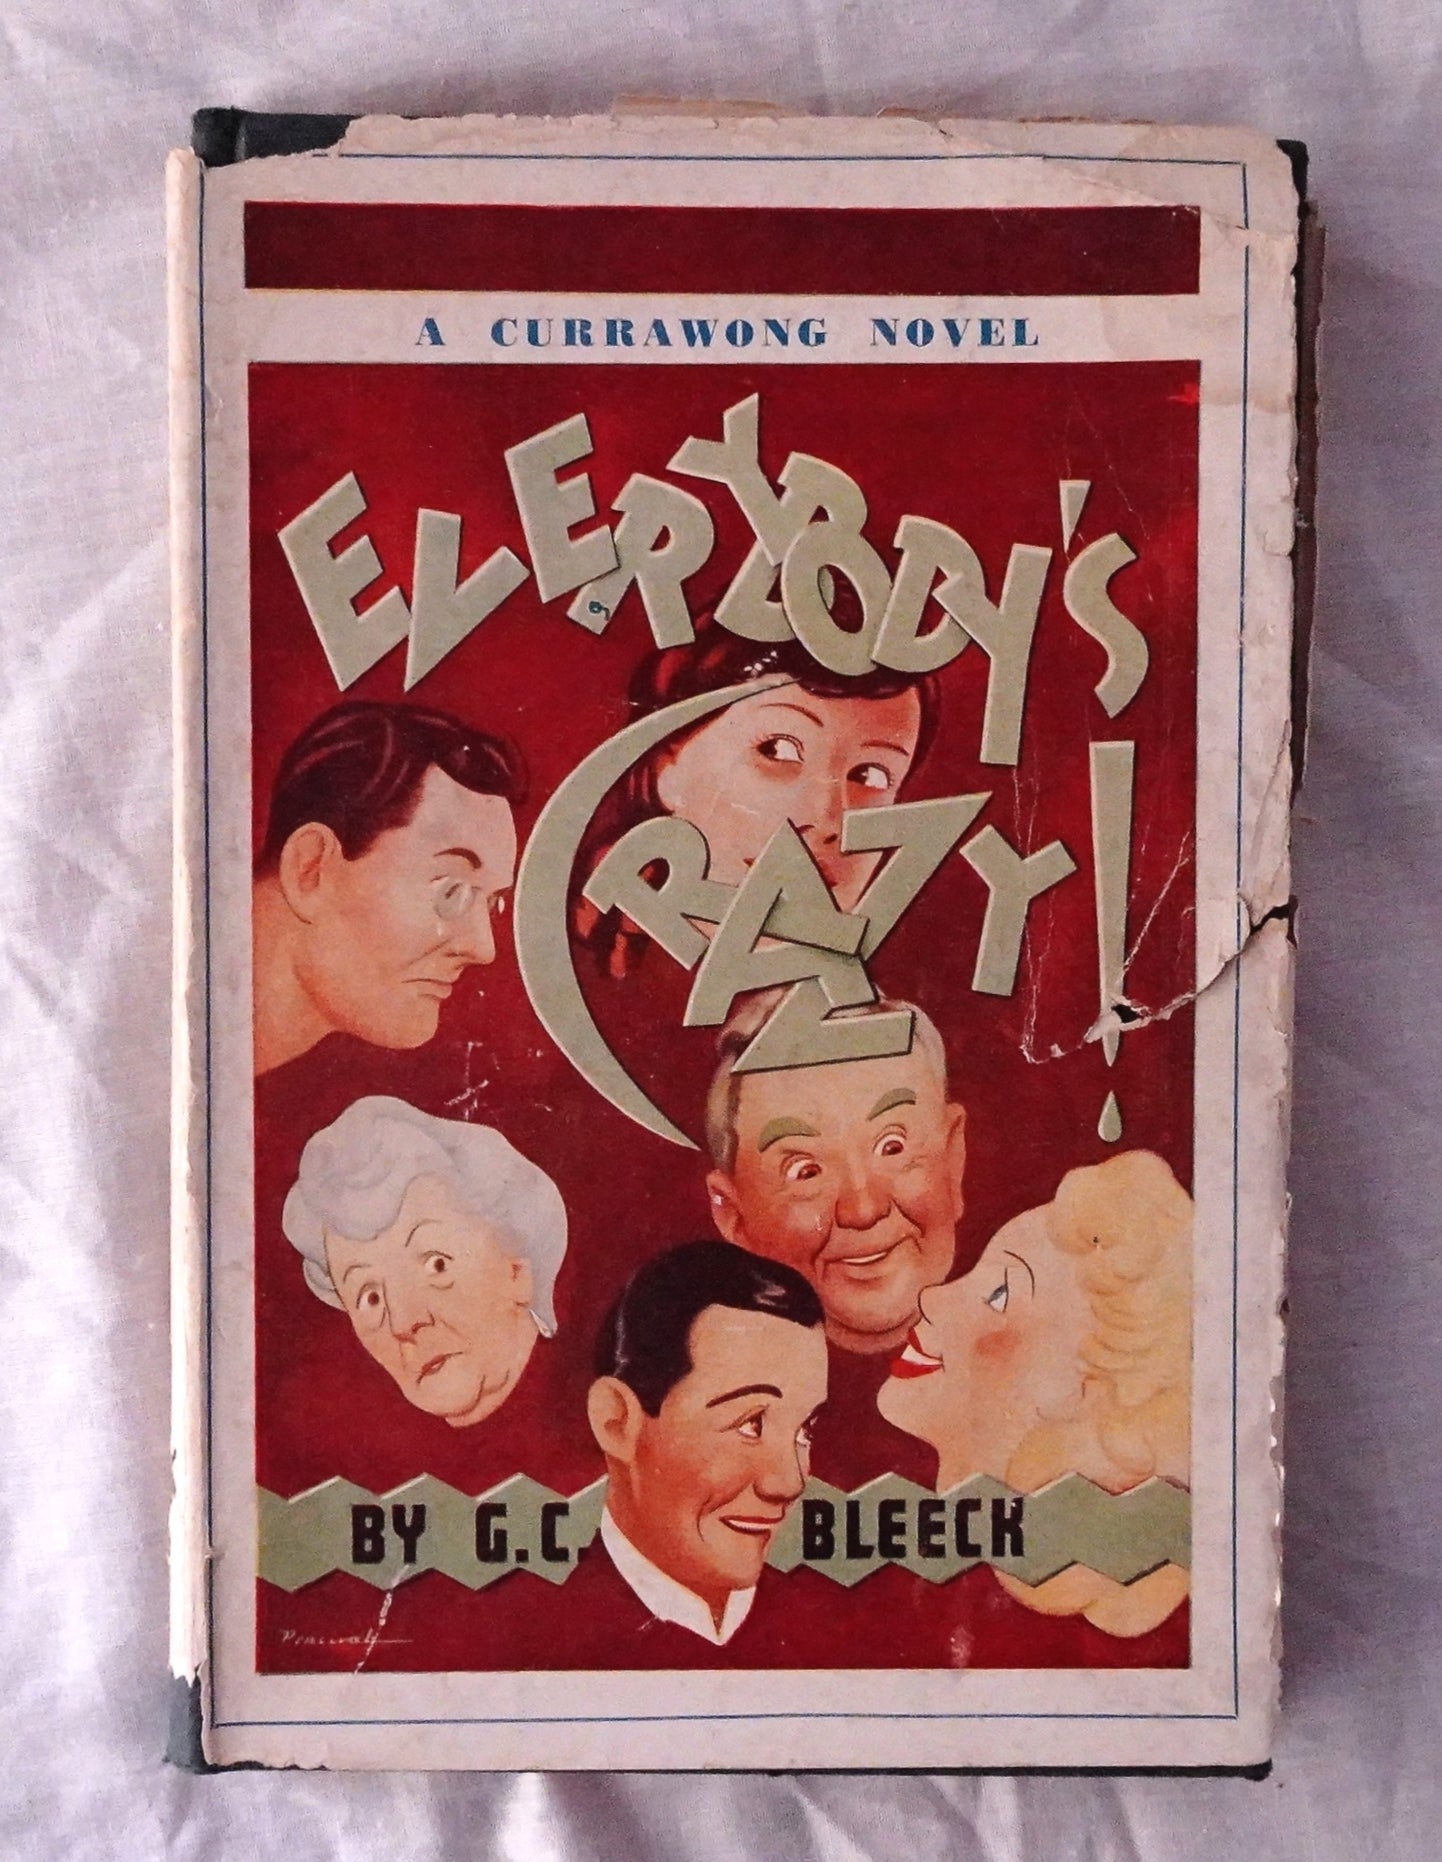 Everybody’s Crazy!  by G. C. Bleeck  (A Currawong Novel)